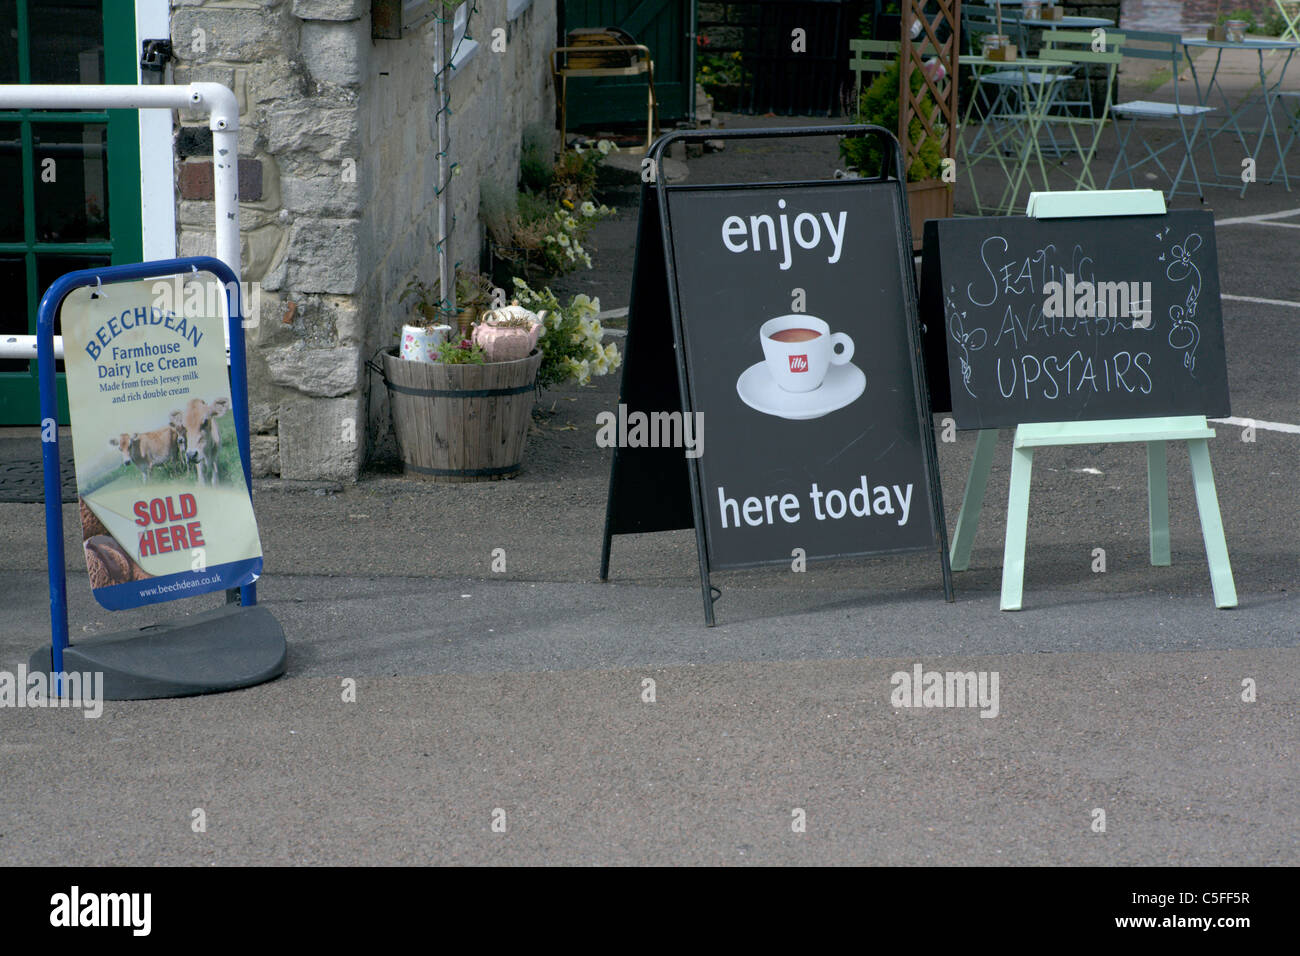 Signs outside a cafe England UK saying seating upstairs Stock Photo